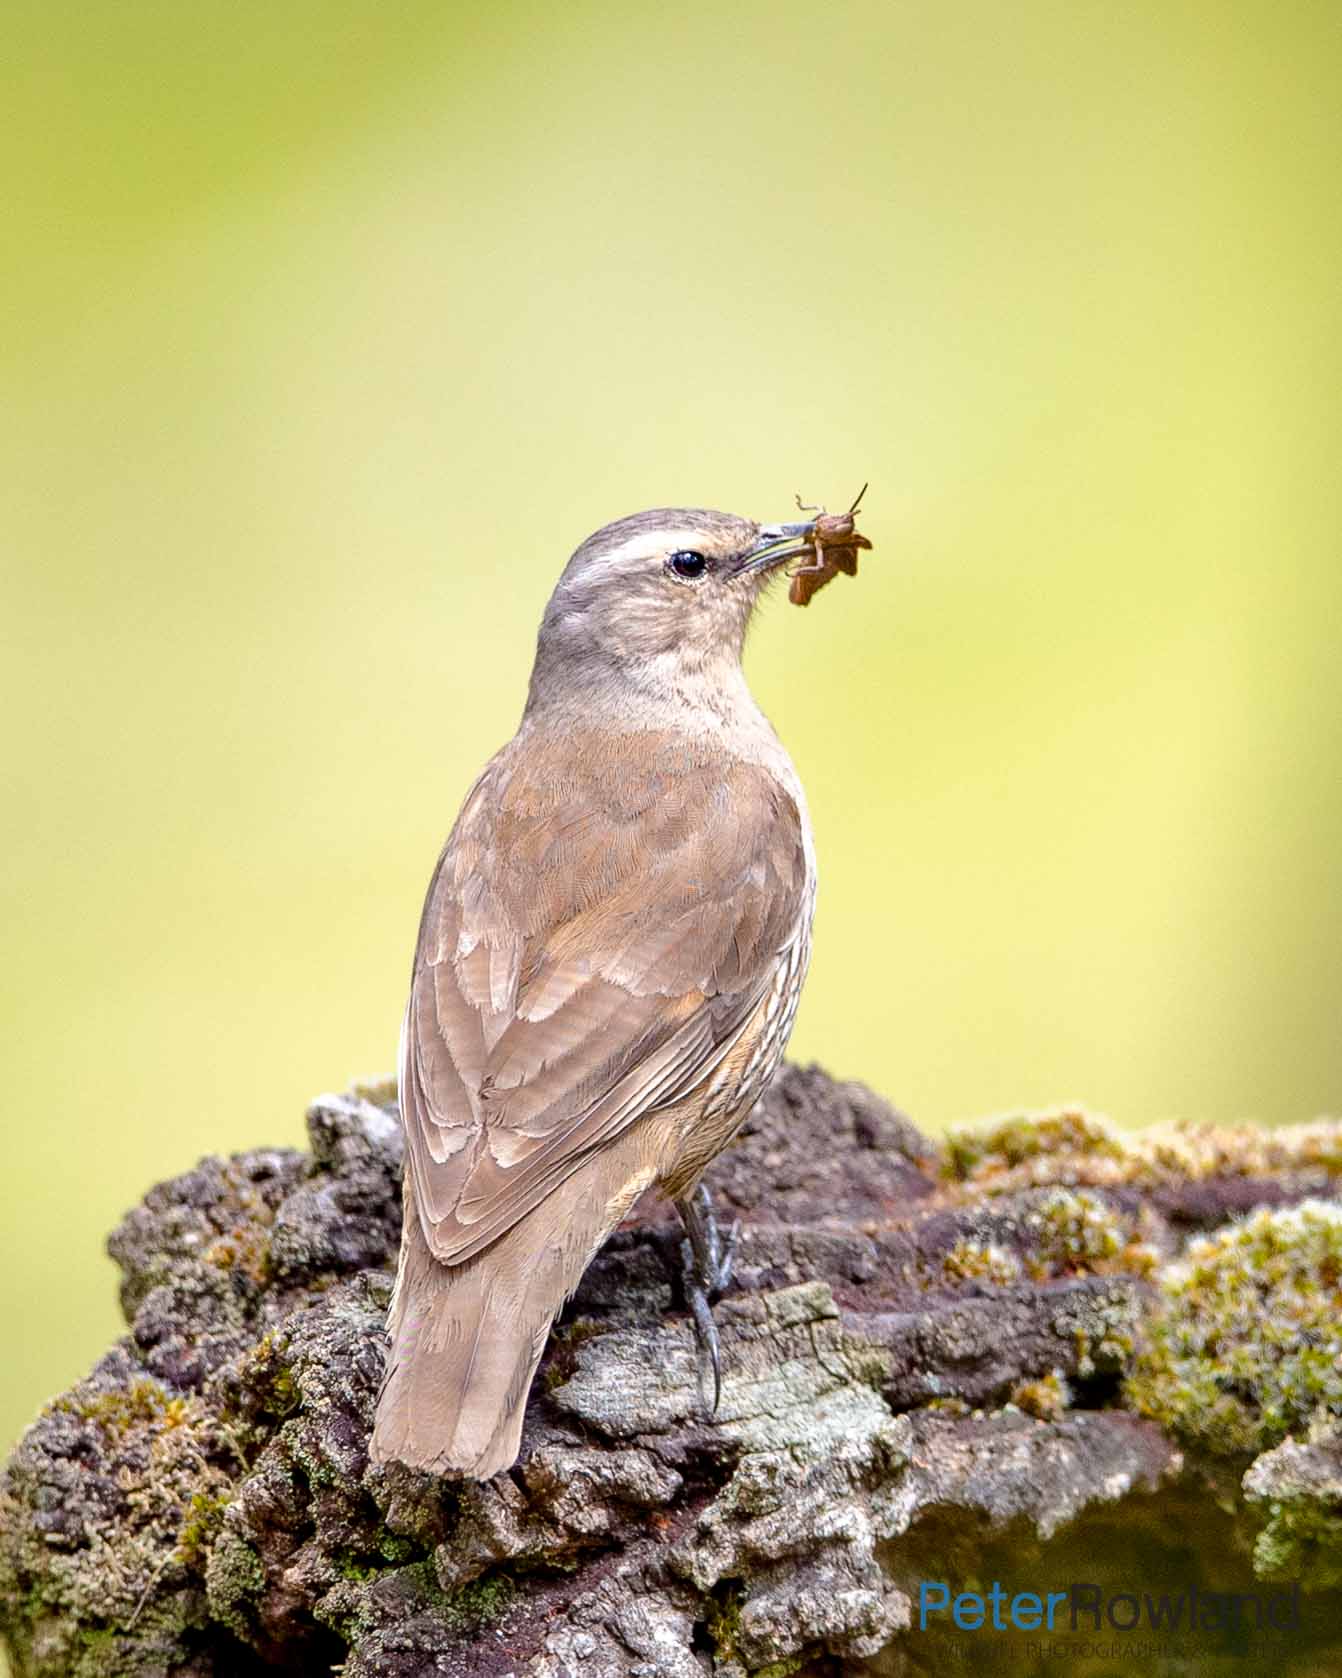 Brown Treecreeper perched on mossy log with grasshopper or cricket in its beak